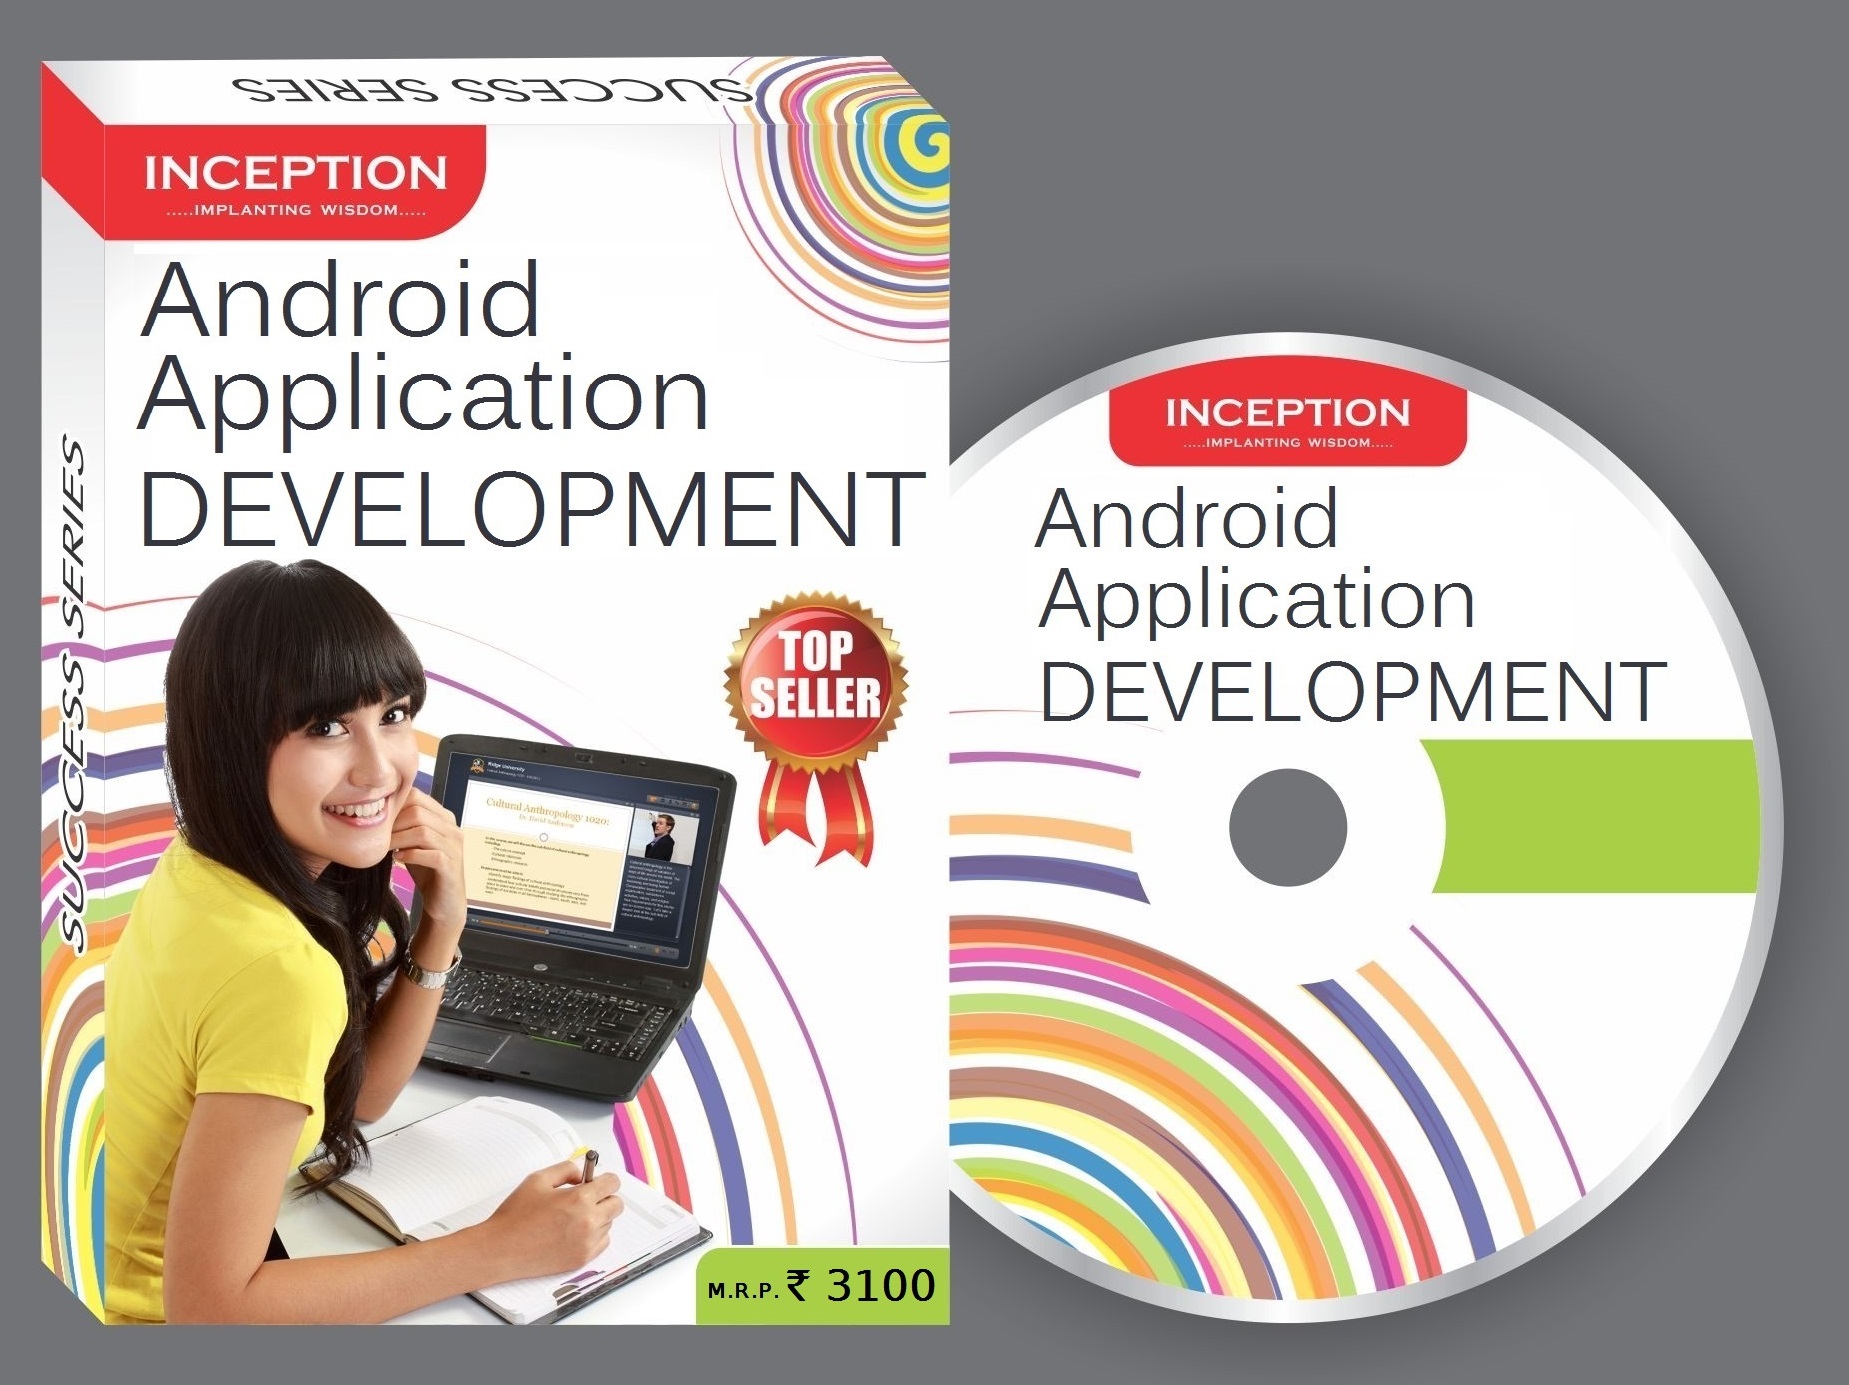 learn Android applications development - full course online